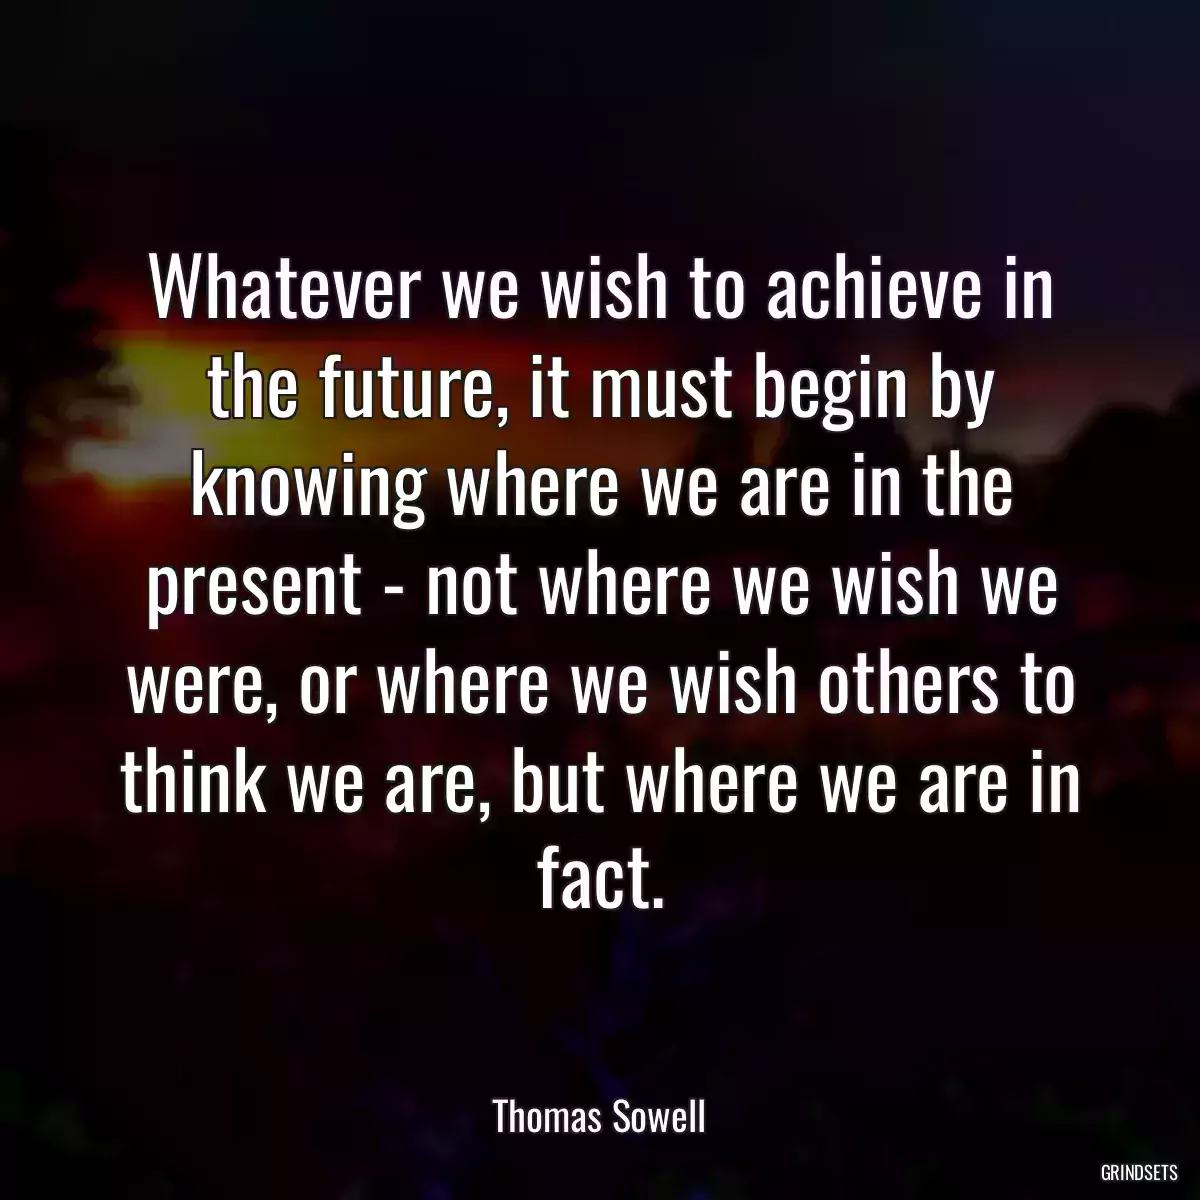 Whatever we wish to achieve in the future, it must begin by knowing where we are in the present - not where we wish we were, or where we wish others to think we are, but where we are in fact.